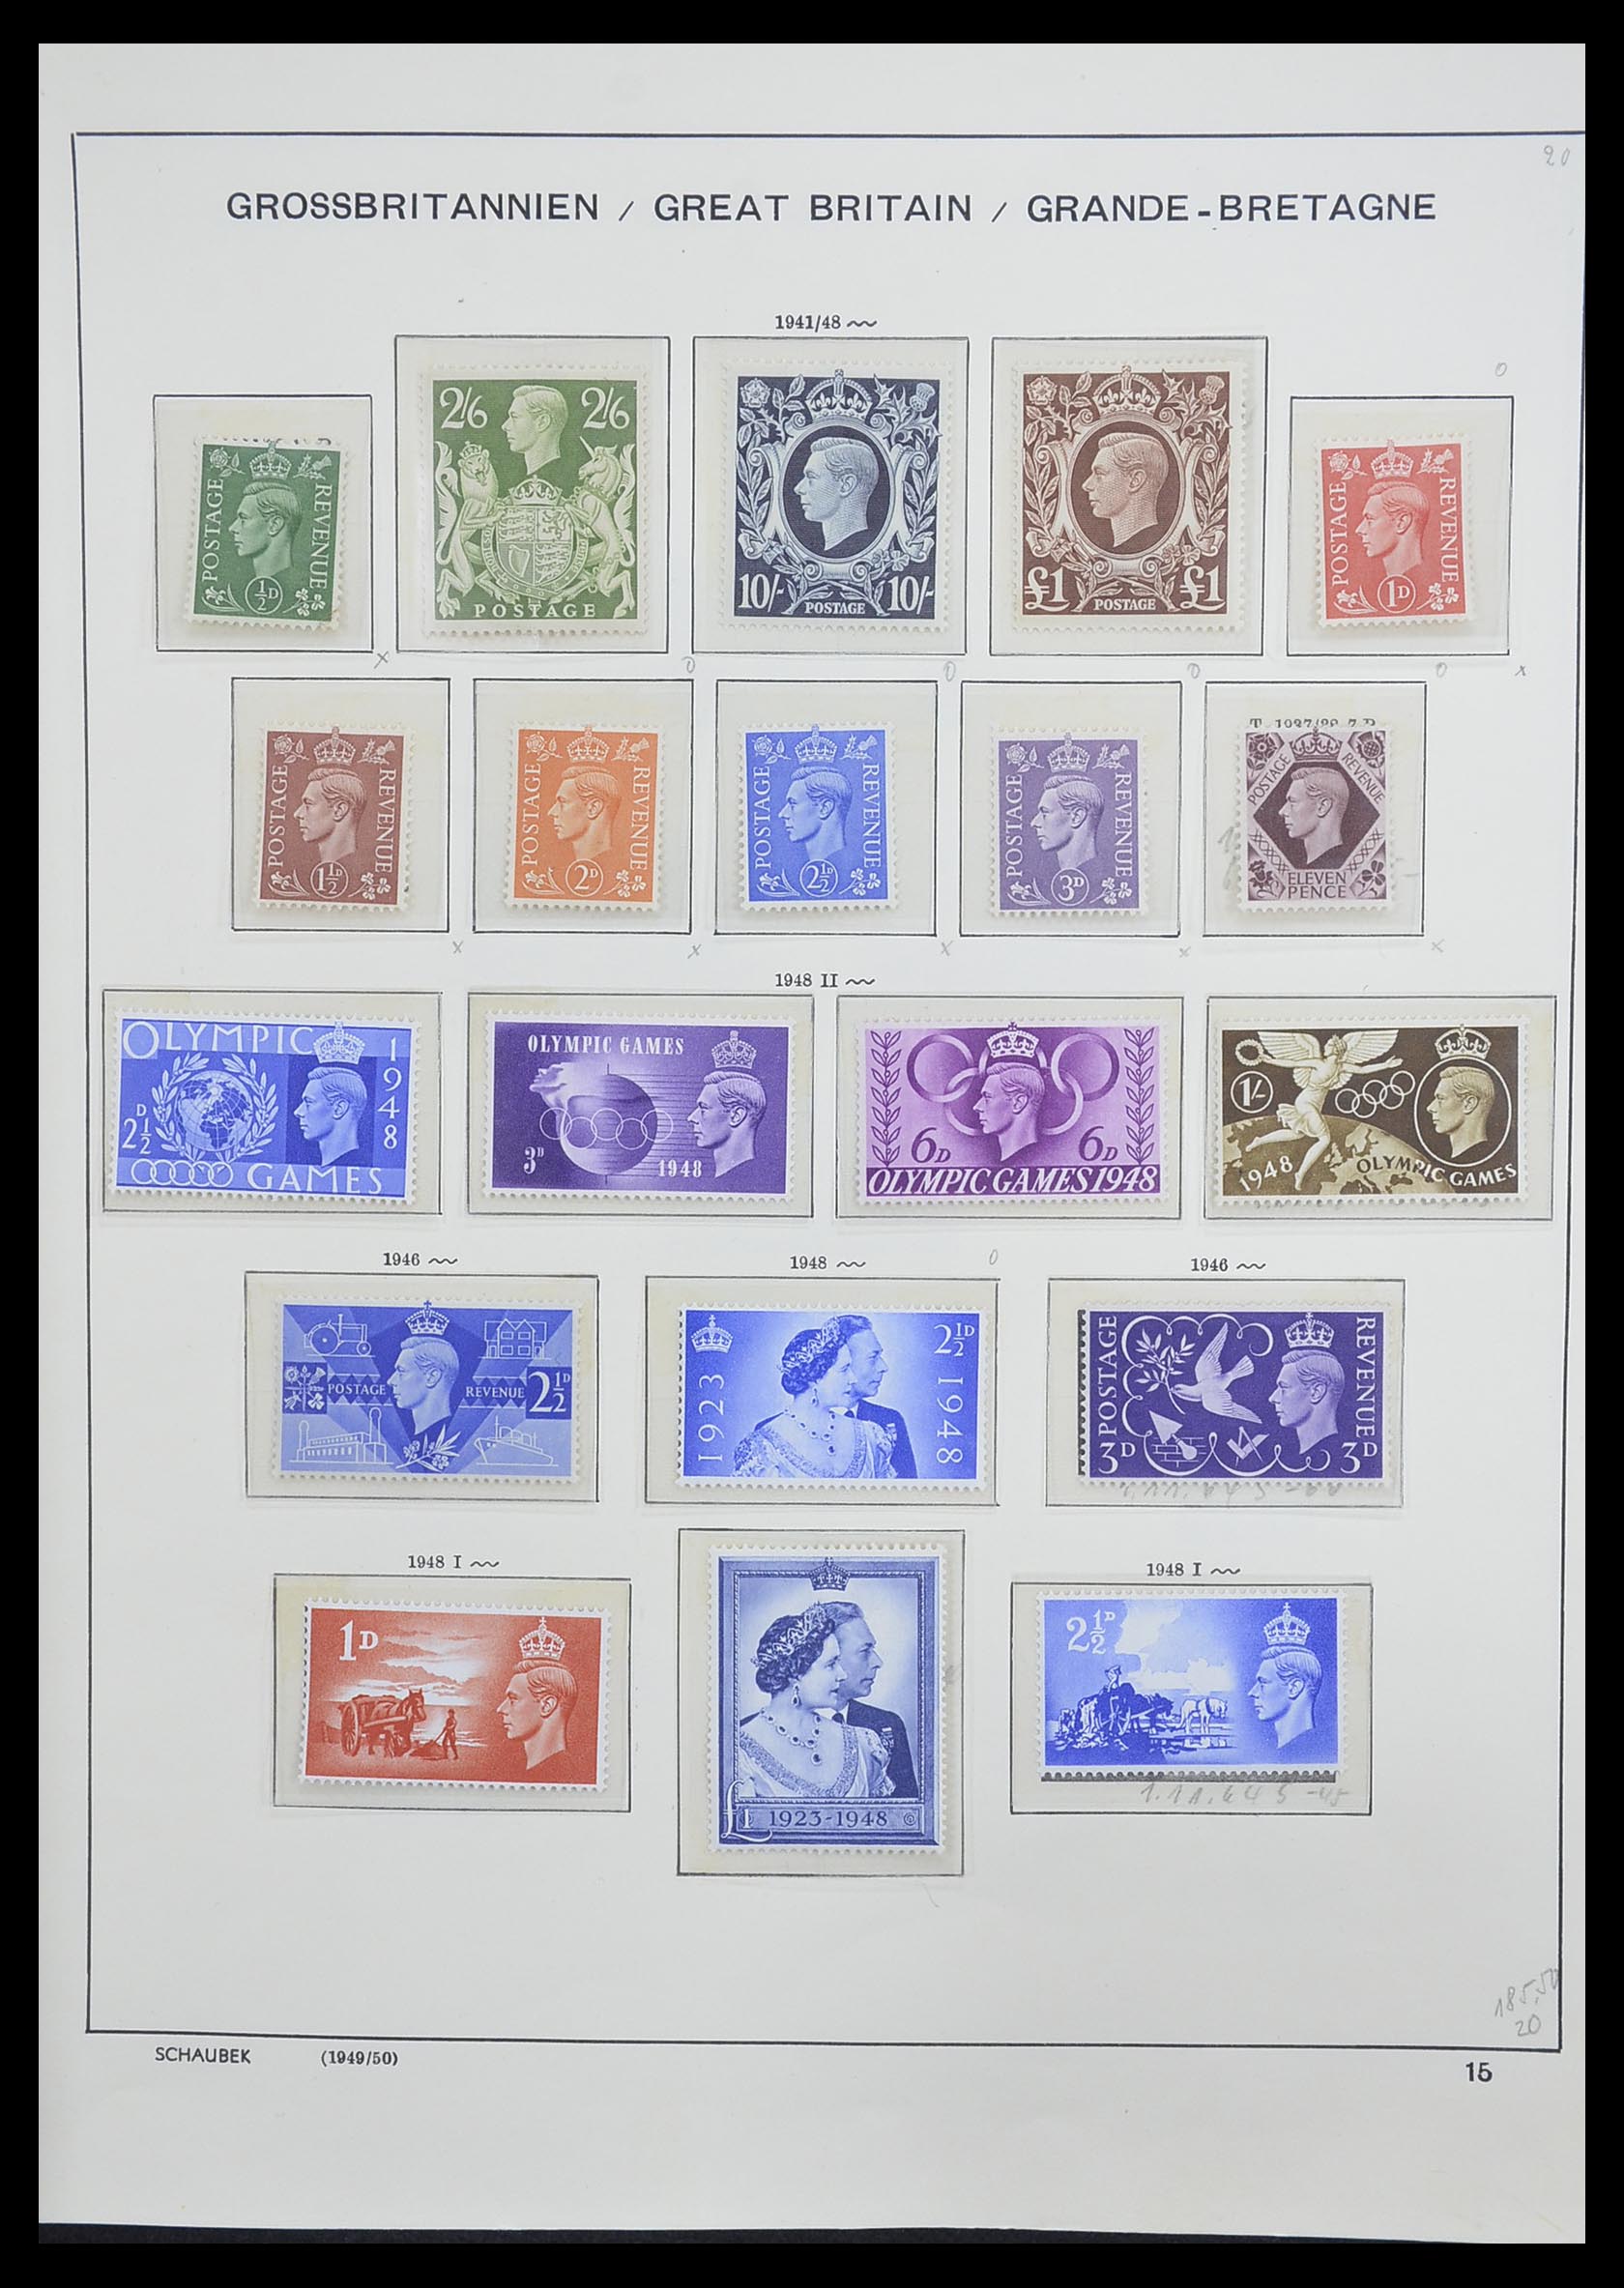 33250 016 - Stamp collection 33250 Great Britain 1841-1995.